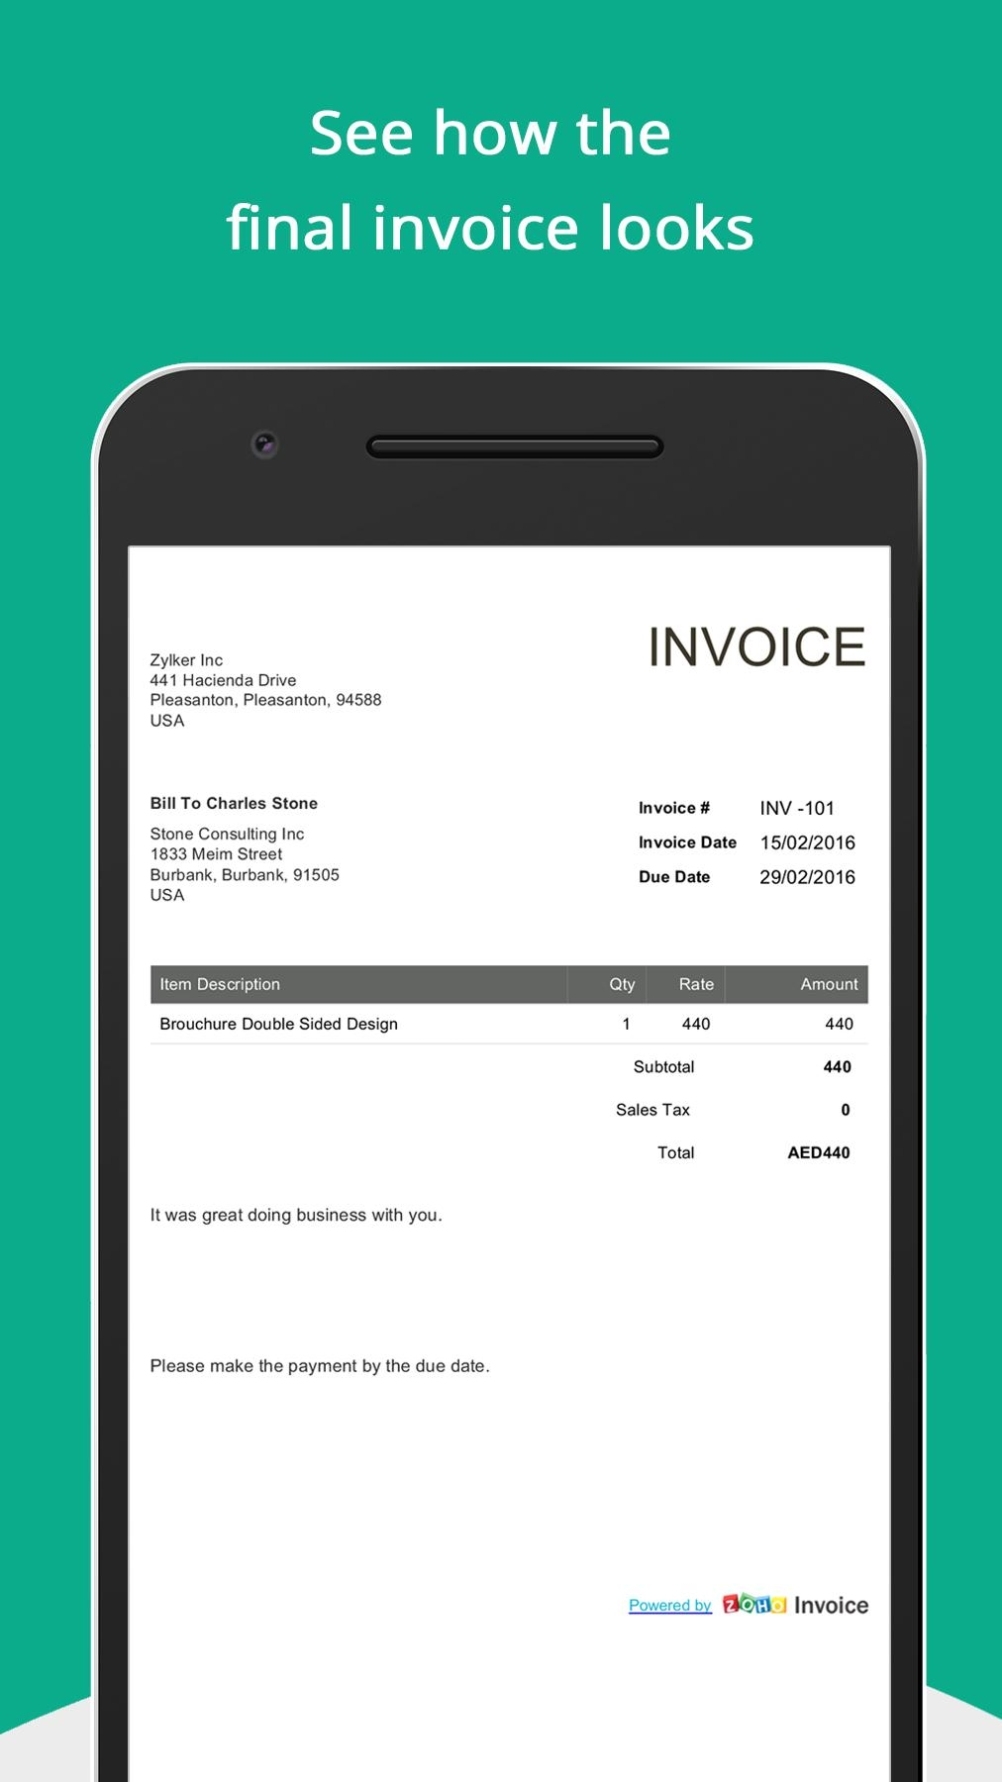 Free Invoice Generator For Android - Apk Download Inside Free Invoice Template For Android